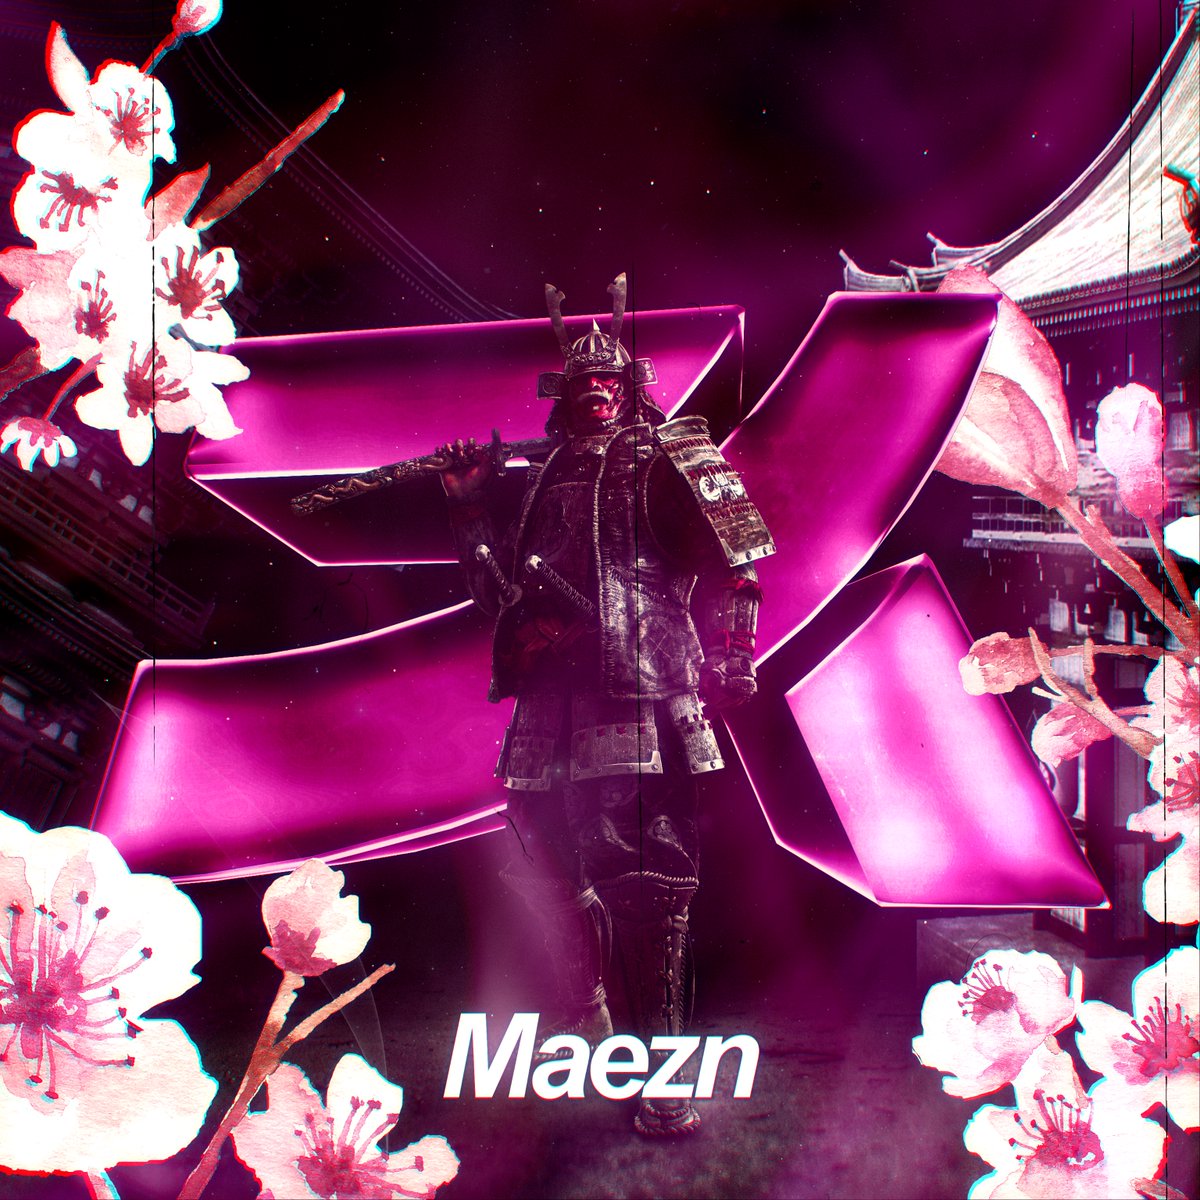 Joined @7kClique!